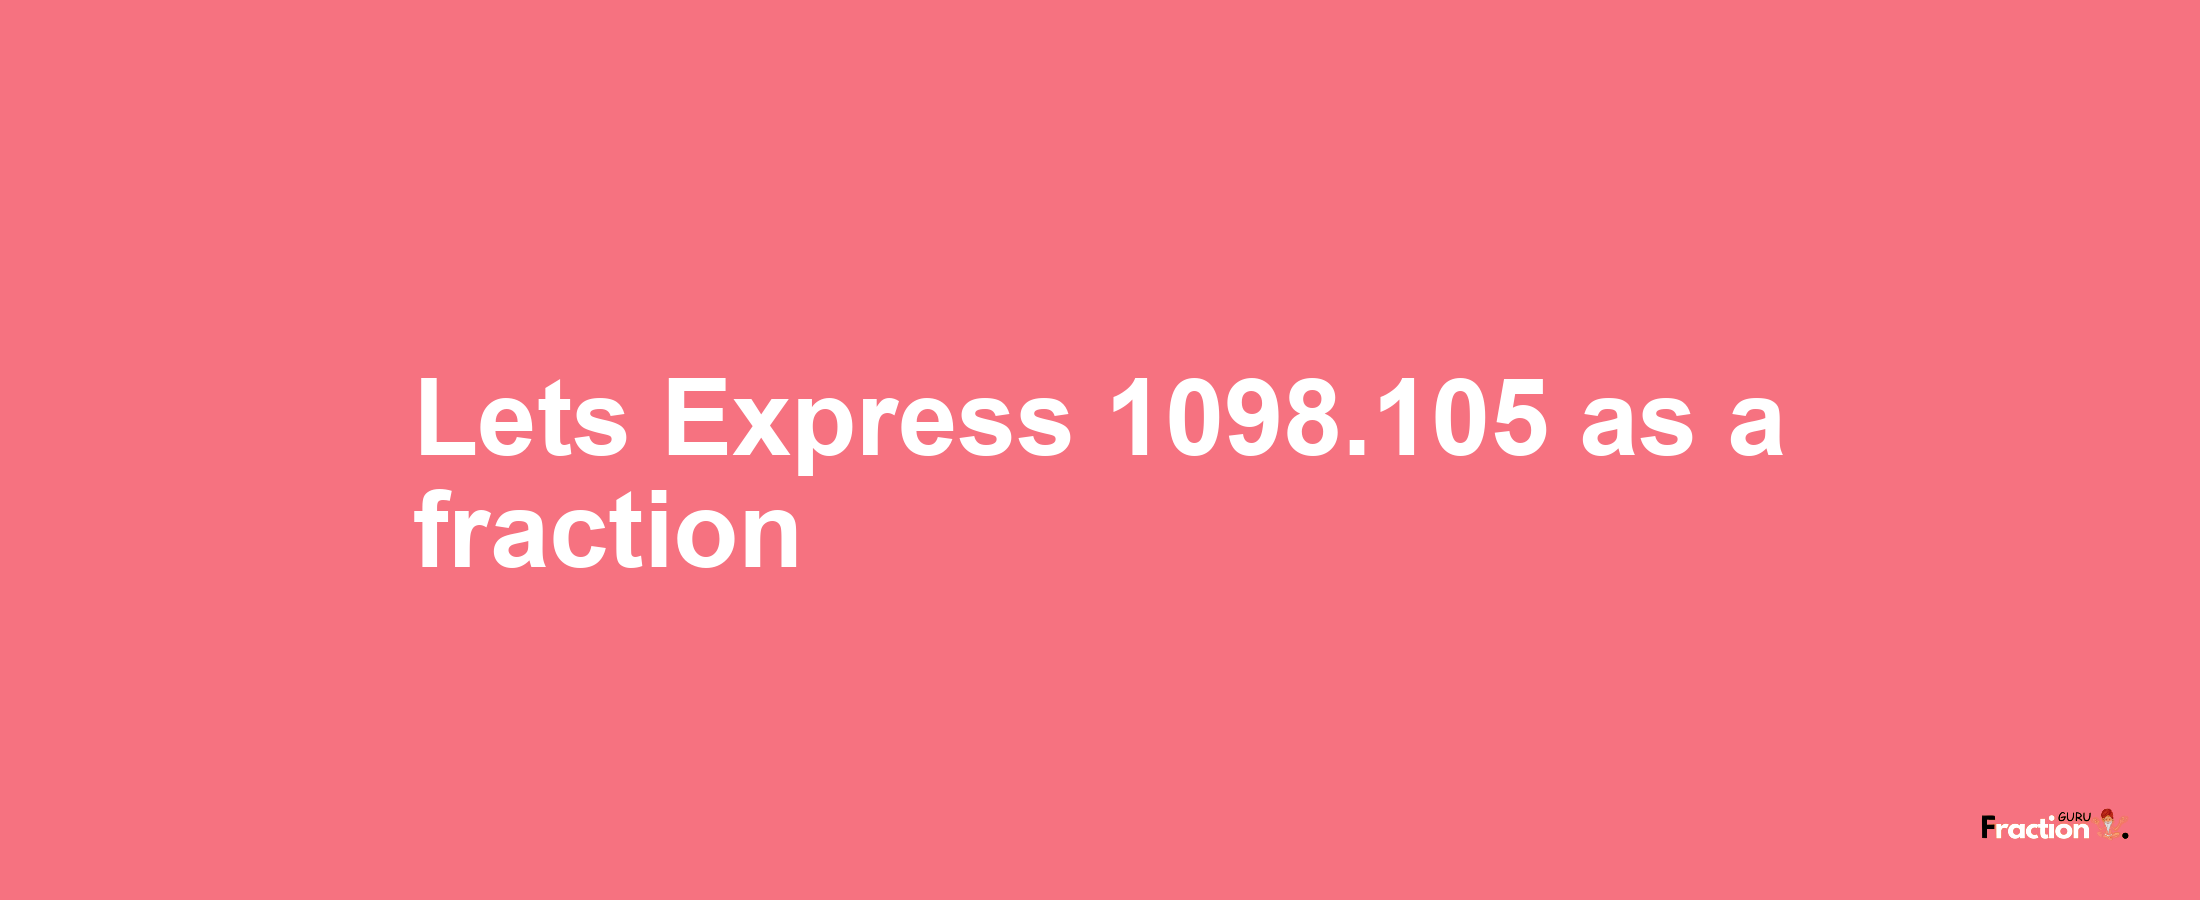 Lets Express 1098.105 as afraction